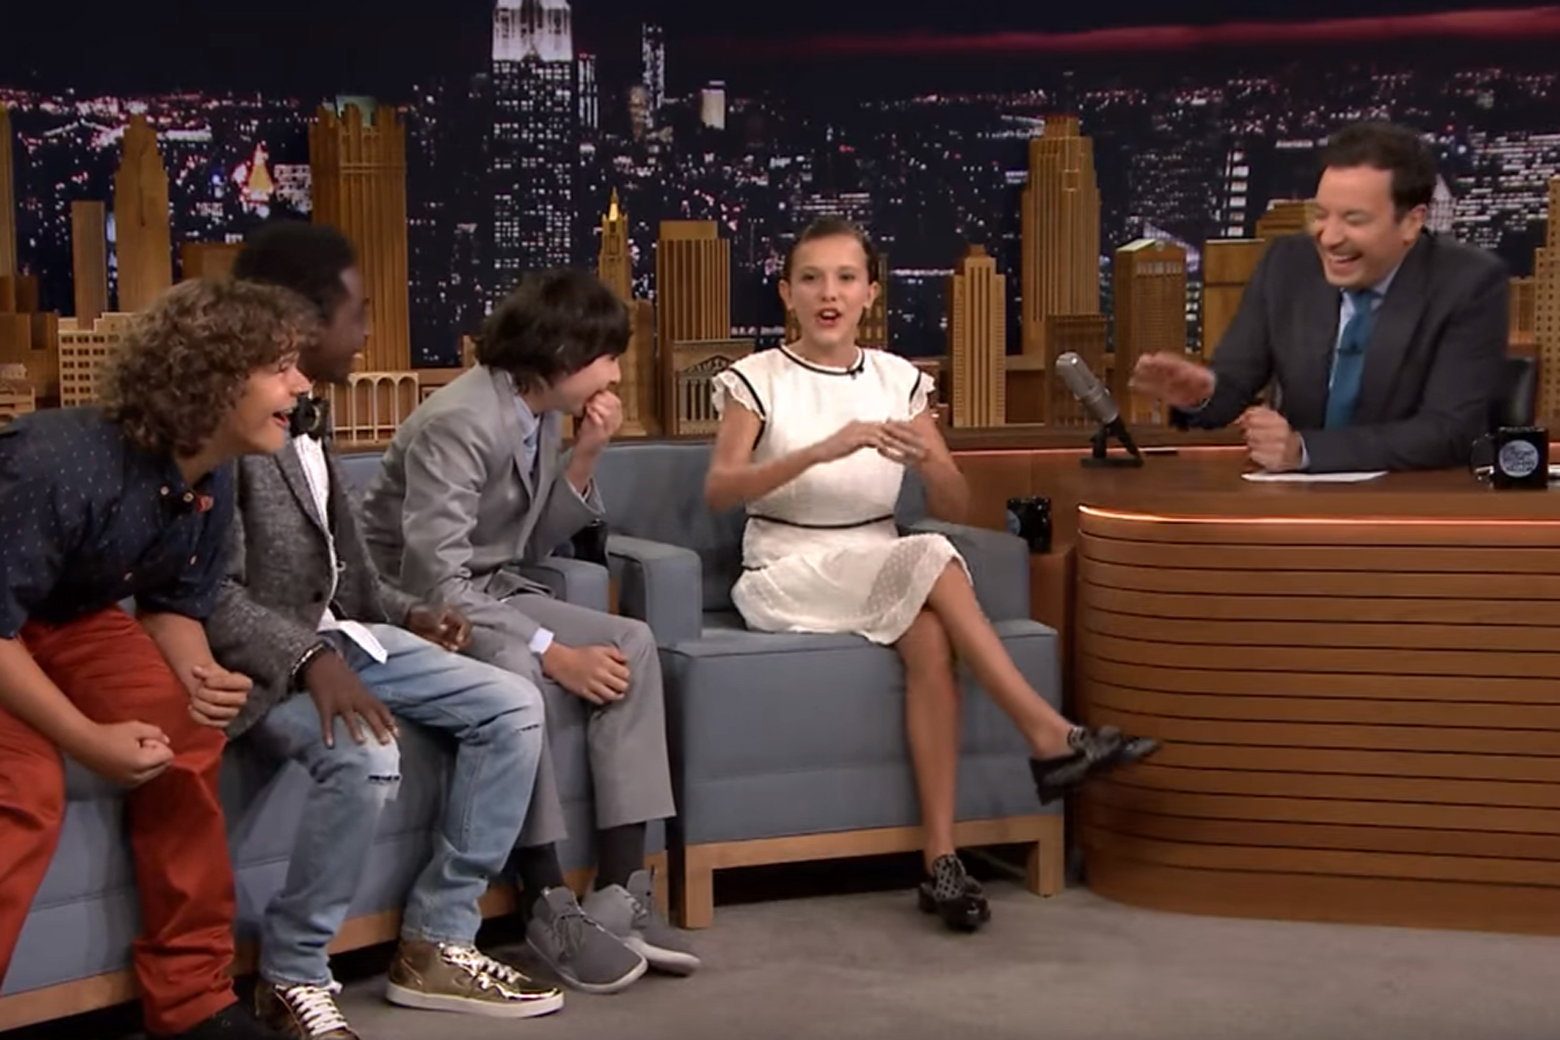 The Tonight Show on X: In a deleted scene from @Stranger_Things